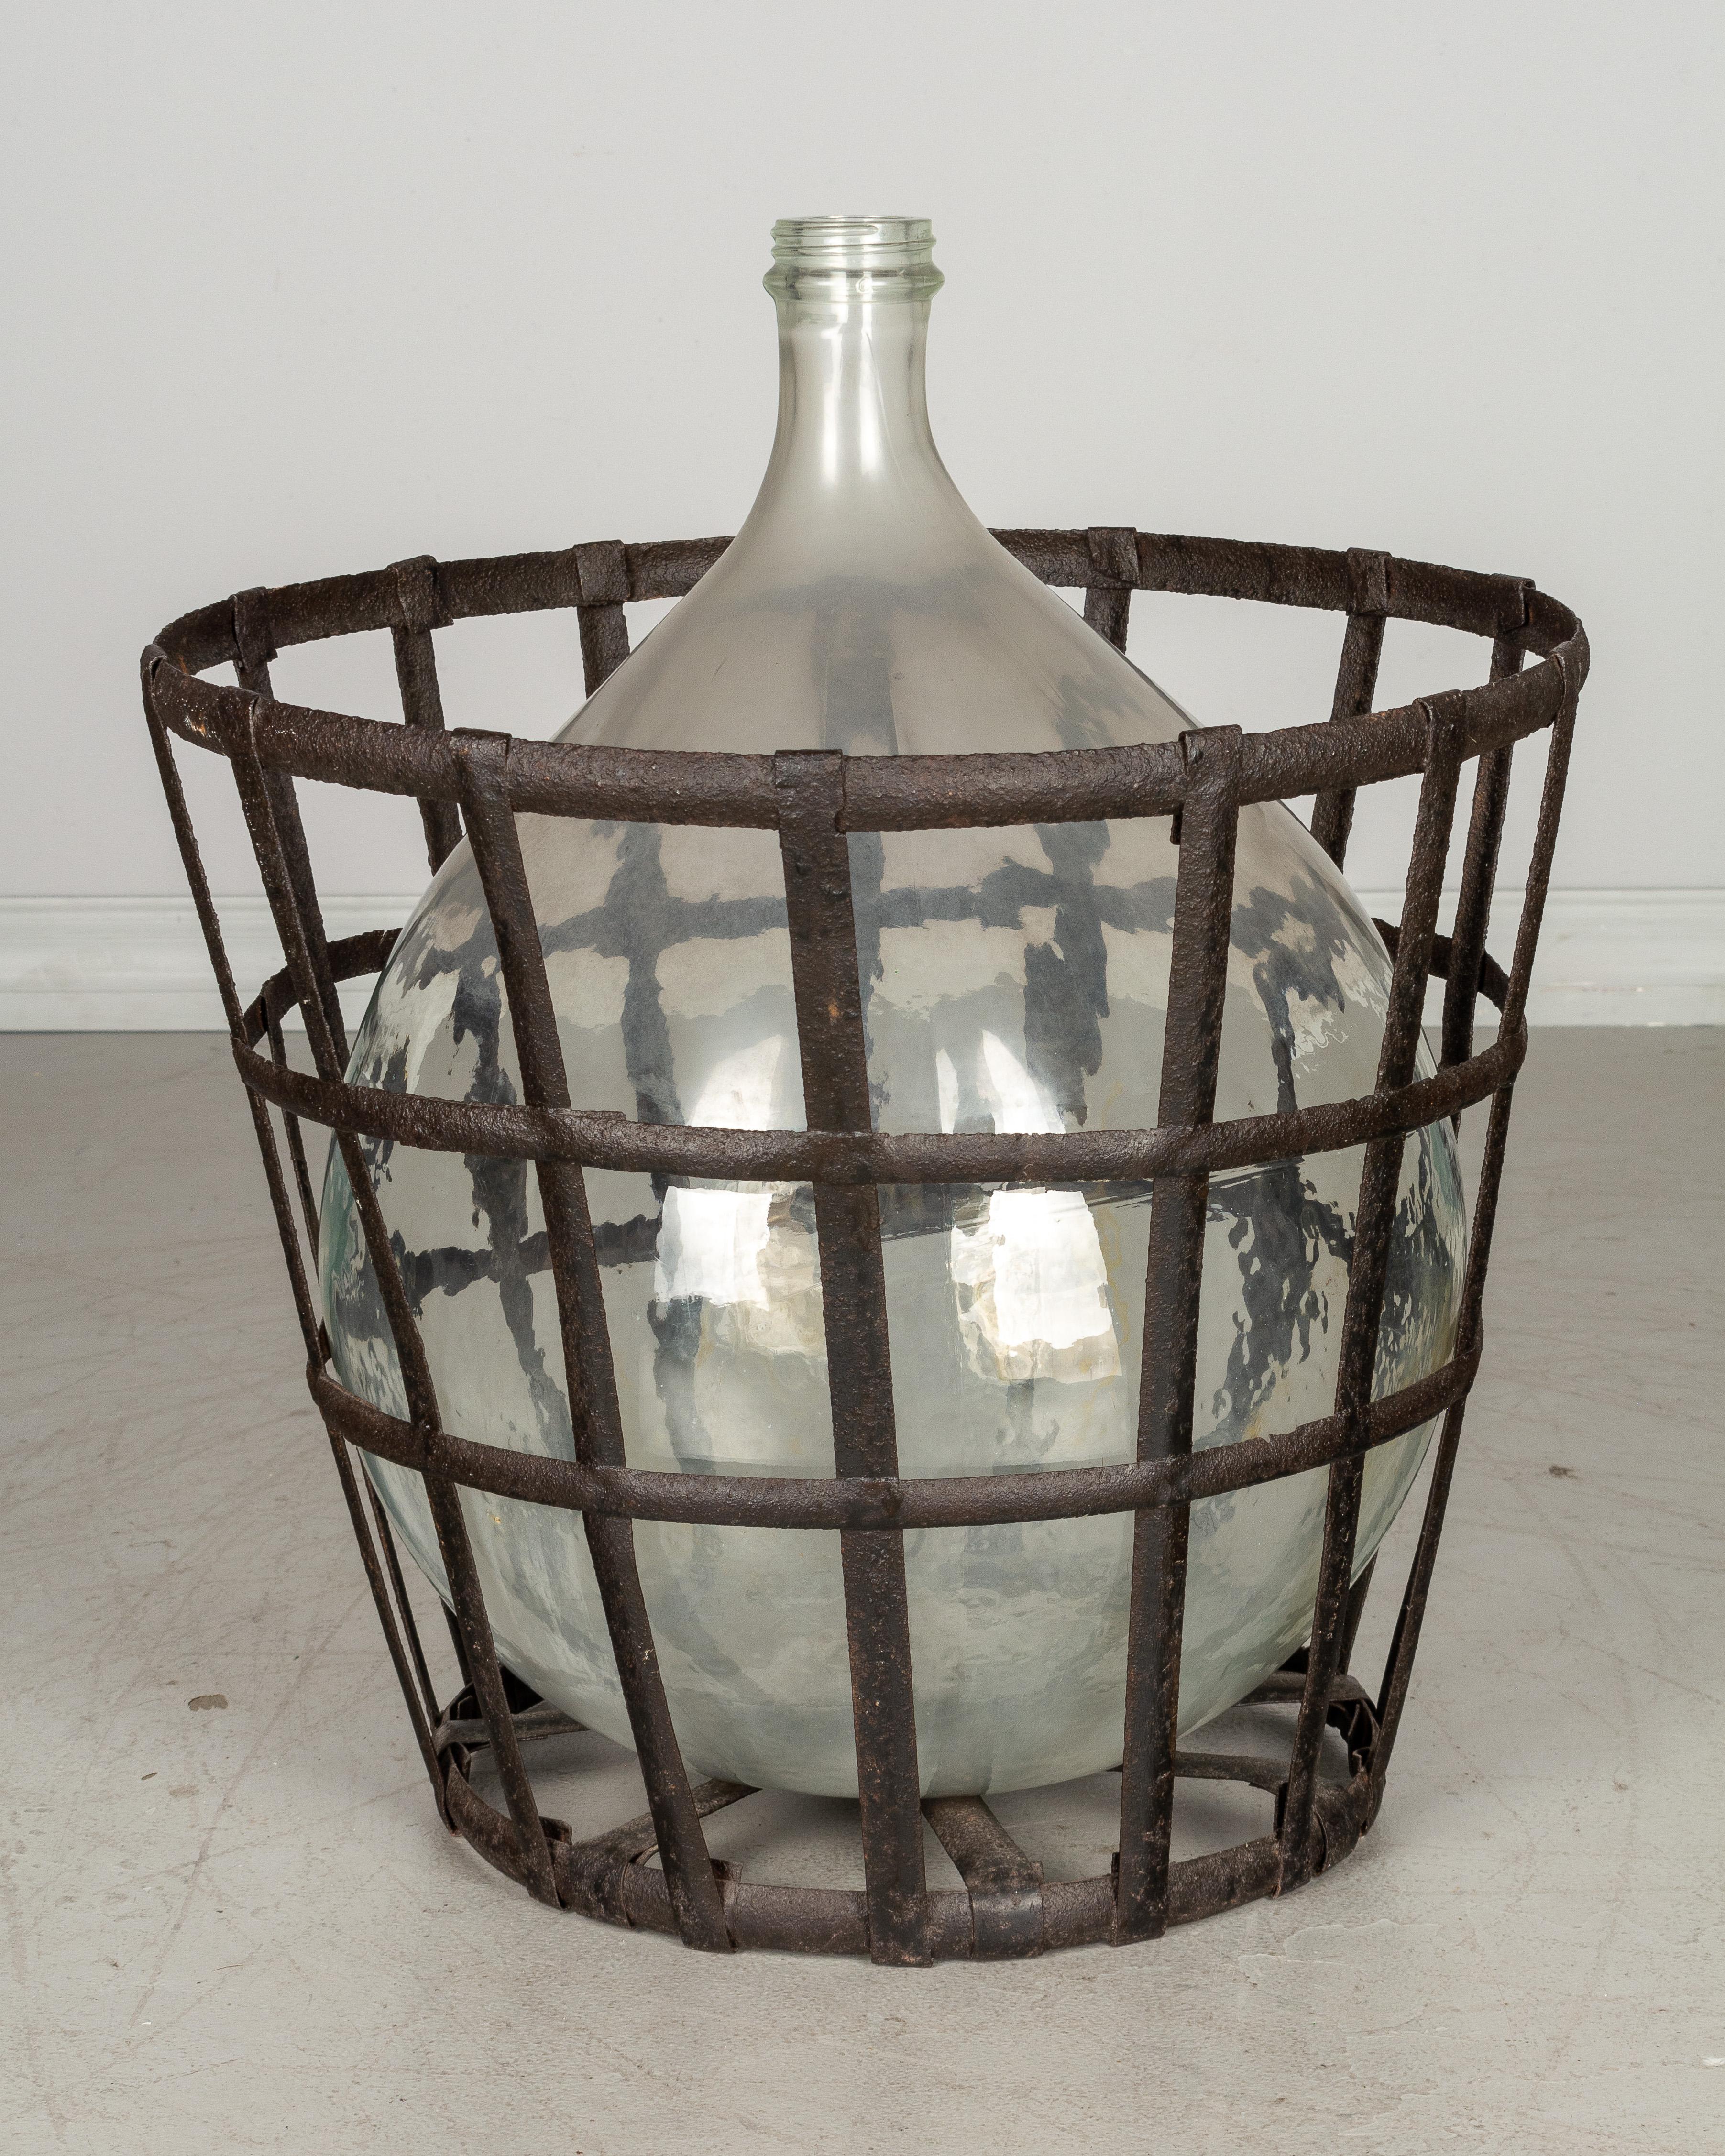 A large French globular form glass dame Jeanne, or demijohn, bottle in original metal cage basket with weathered patina. Capacity: 25 liters. Weight: 16 lbs.